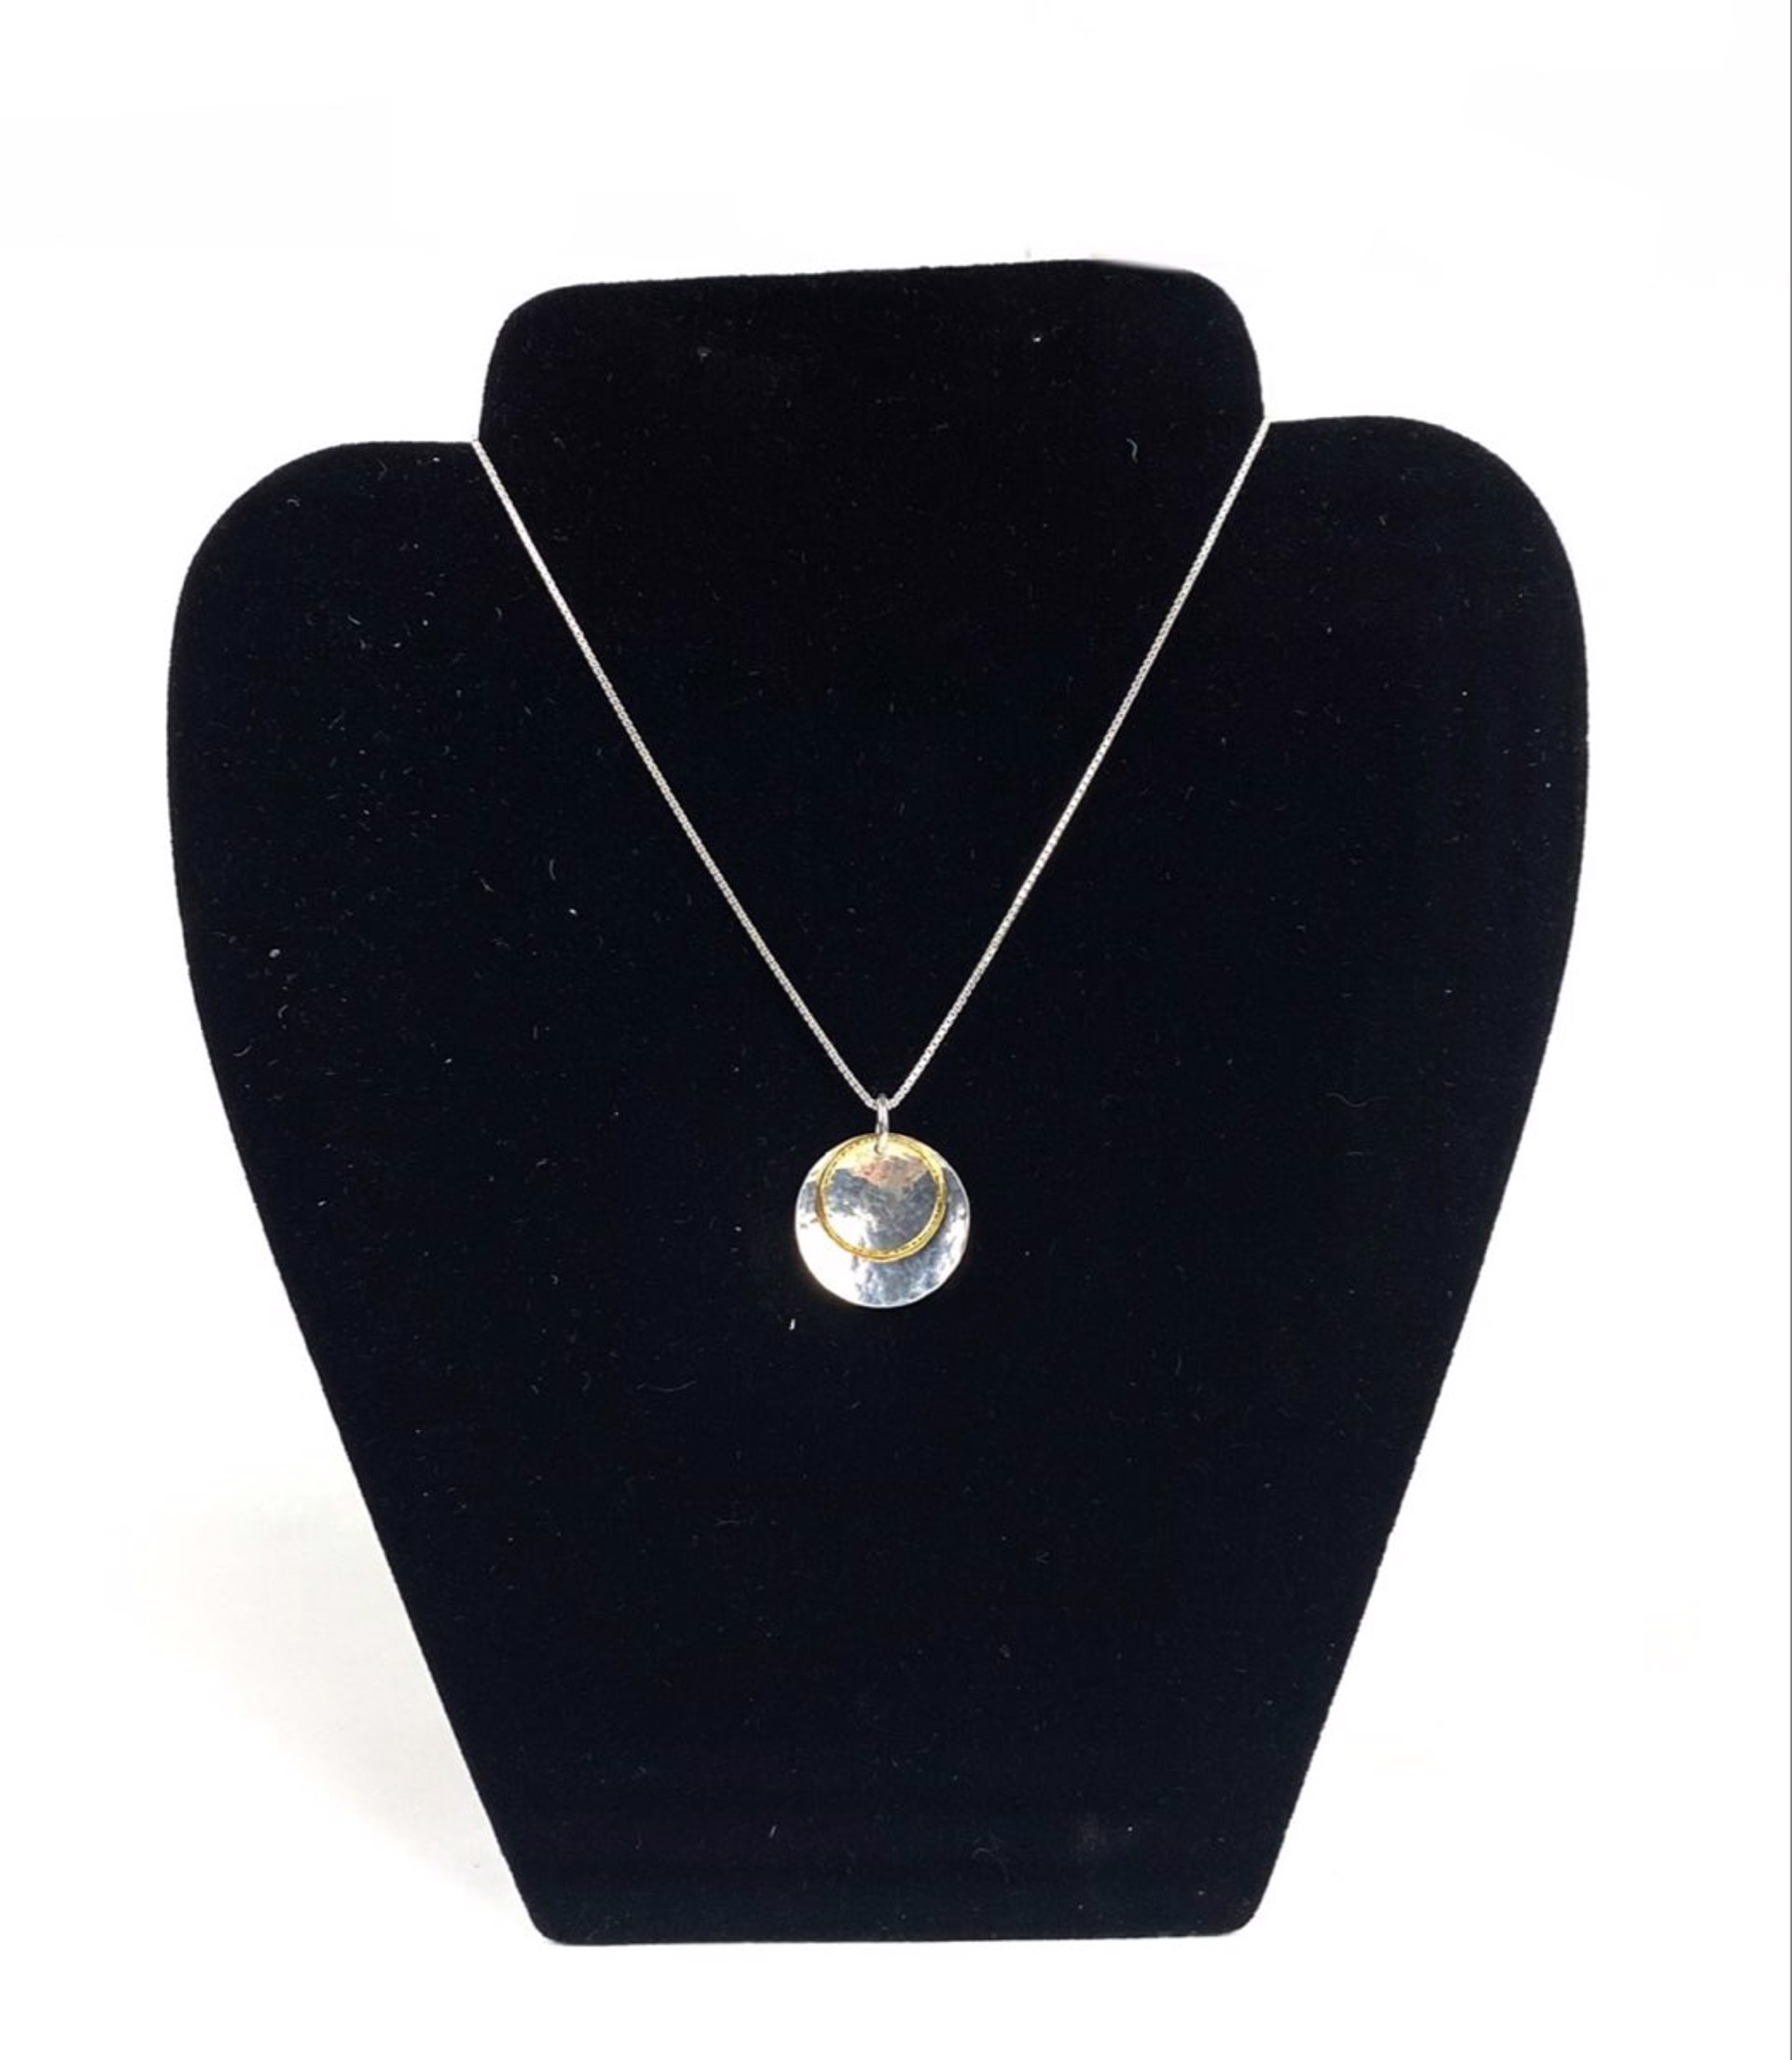 Vermeil Circle Necklace with Textured Disk by Nichole Collins